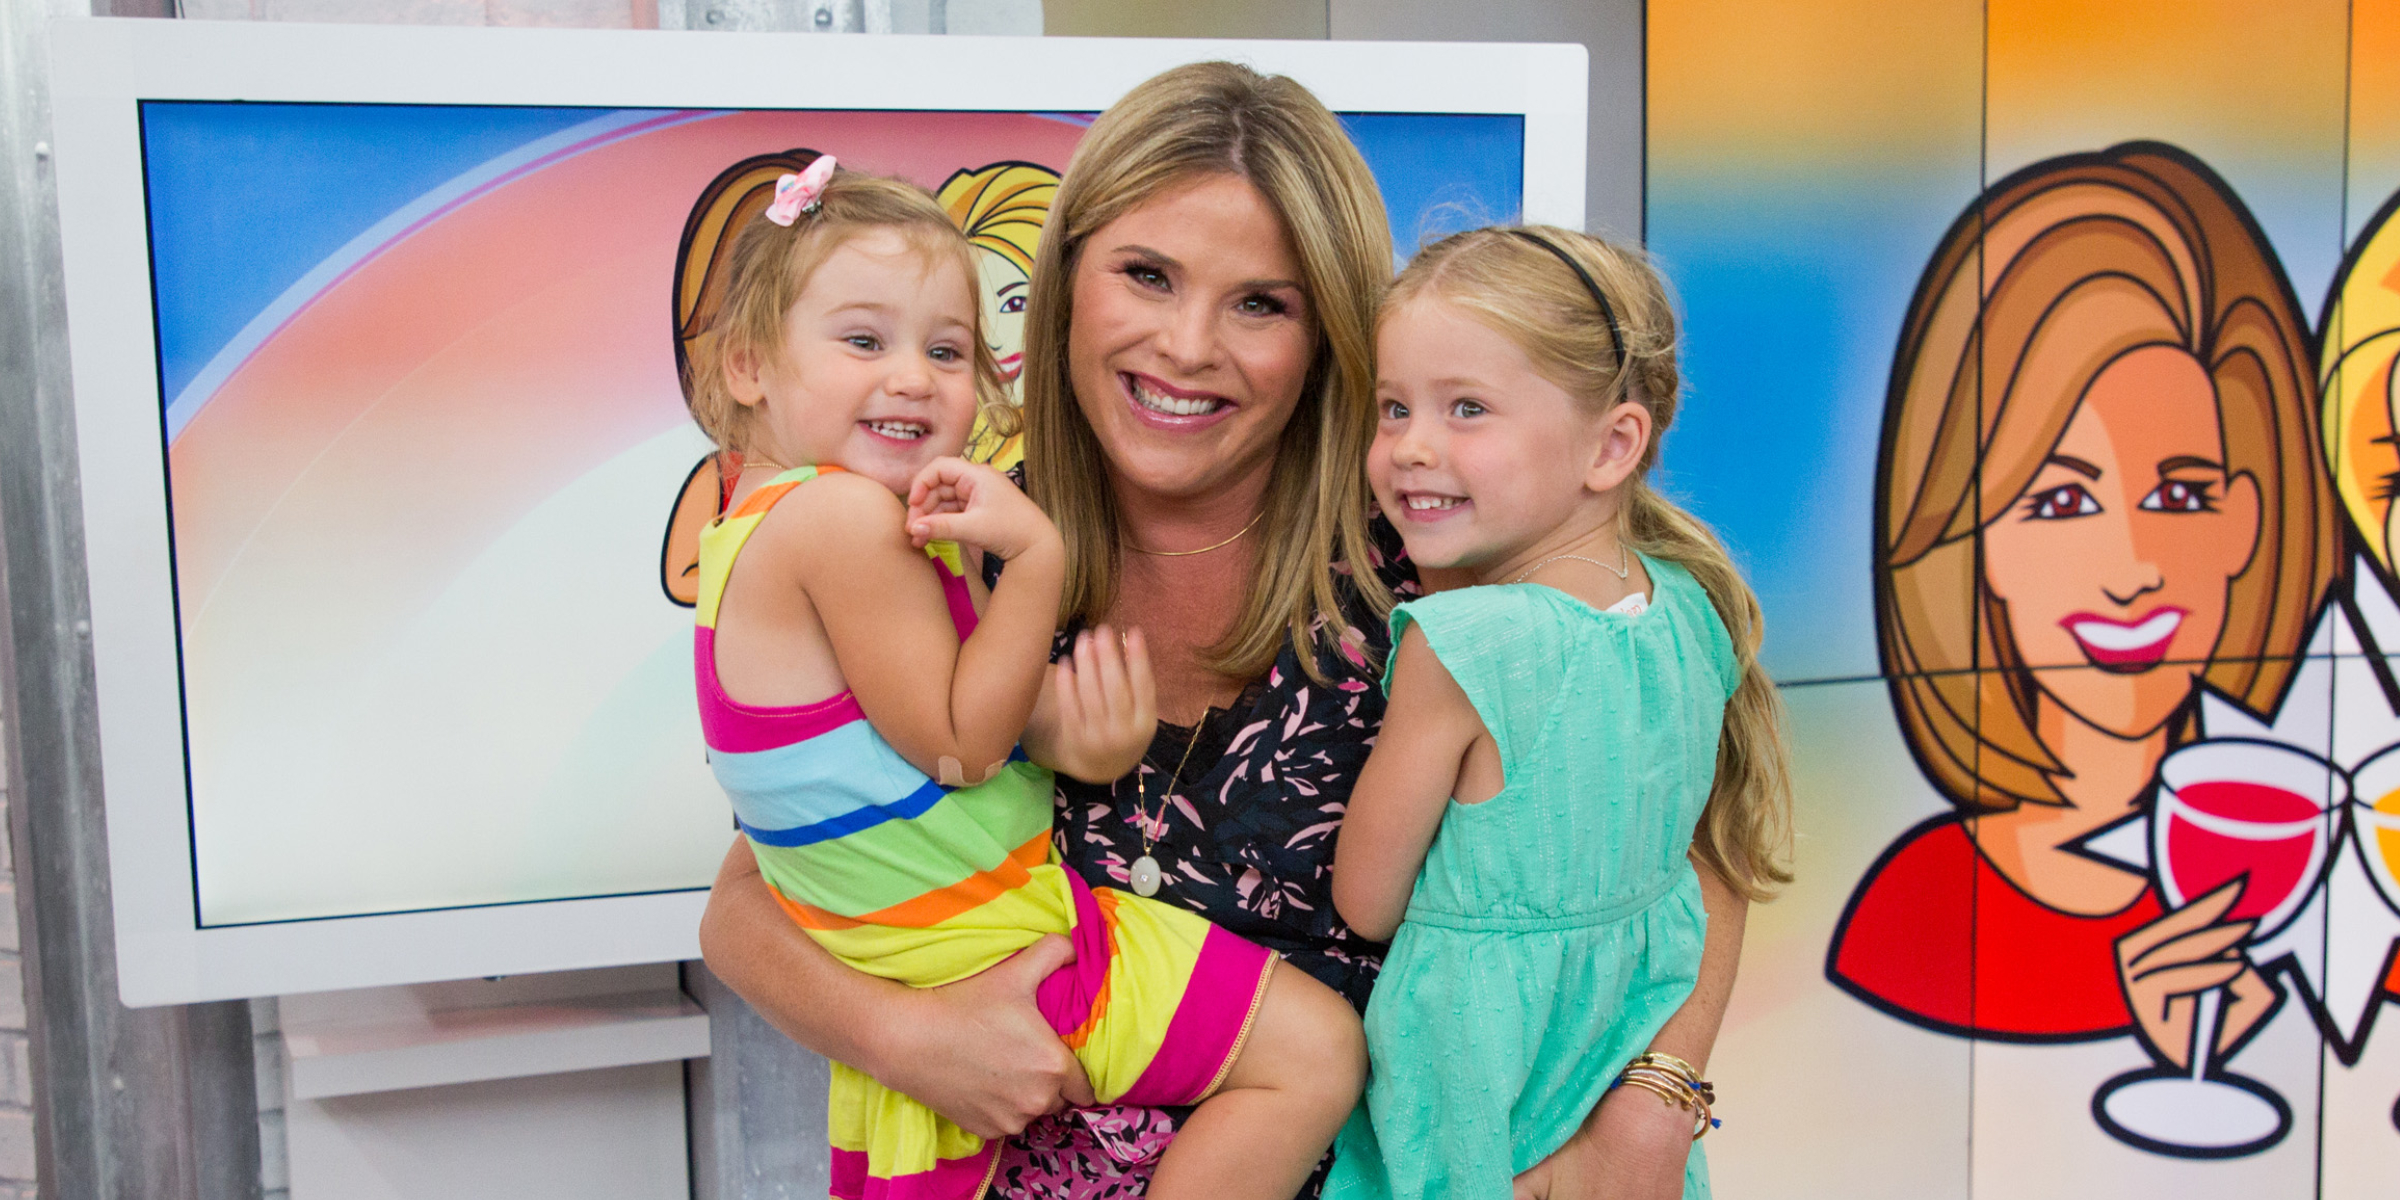 Jenna Bush Hager and her daughters Mila and Poppy | Source: Getty Images